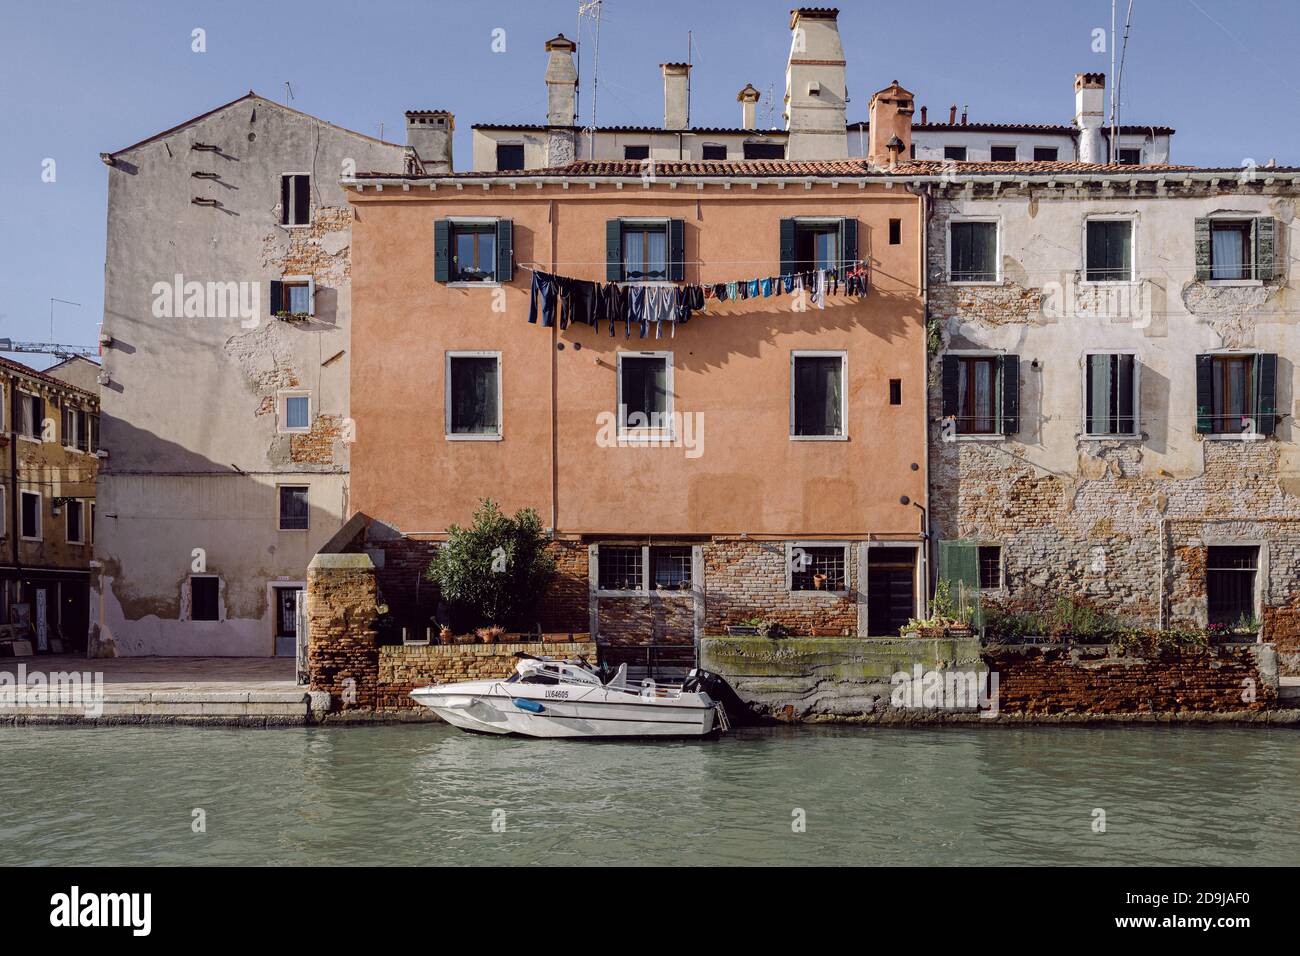 Tall building external facade with orange wall, moored boat on a Venice canal Stock Photo